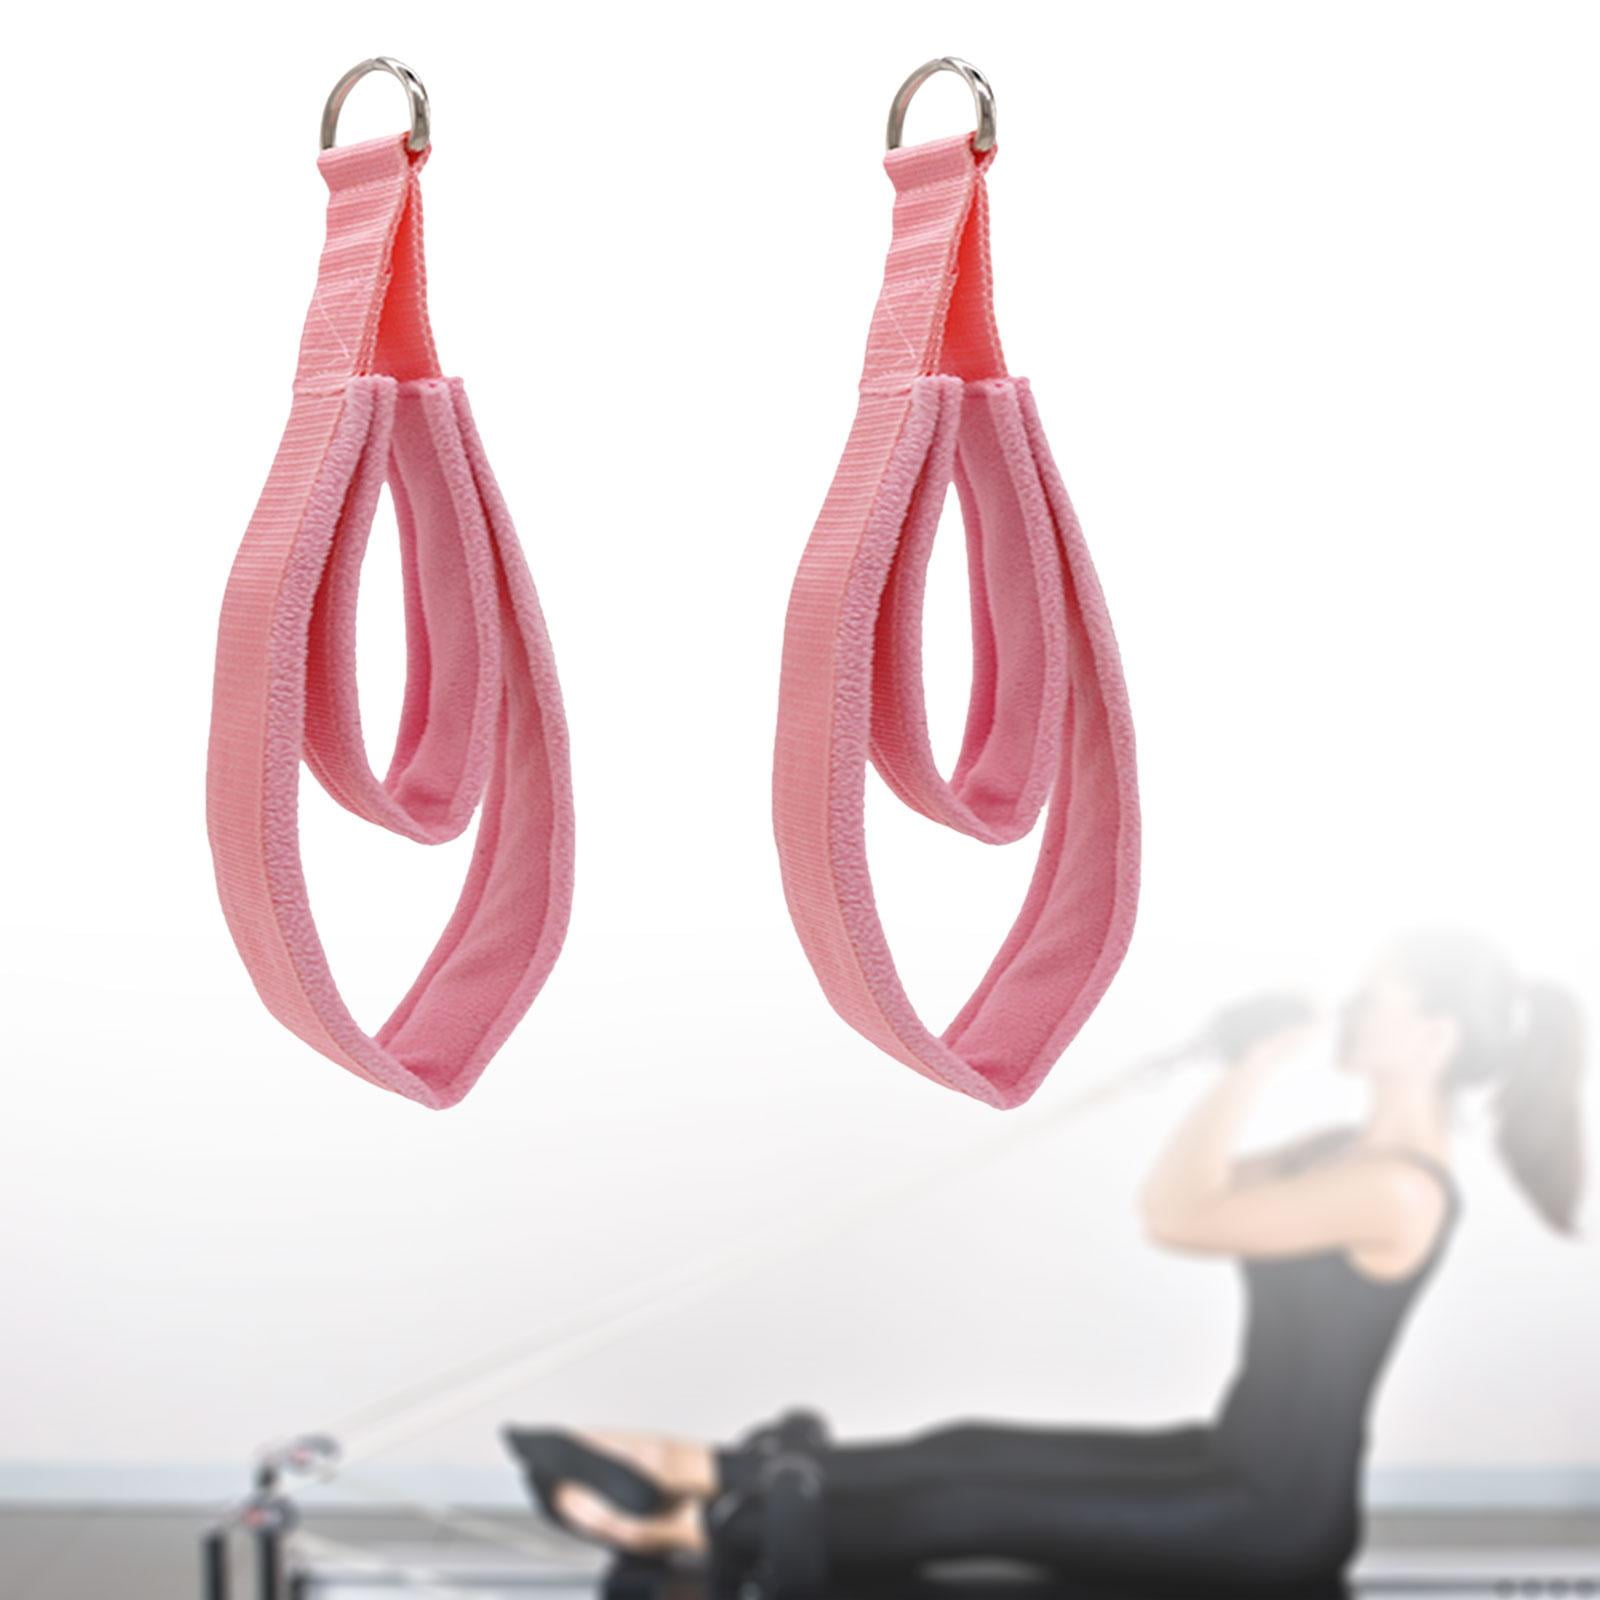 1Pcs Pilates Double Loop Straps for Reformer Feet Fitness D-Ring Straps  Handle Yoga Exercise Accessories for Home Gym Workout